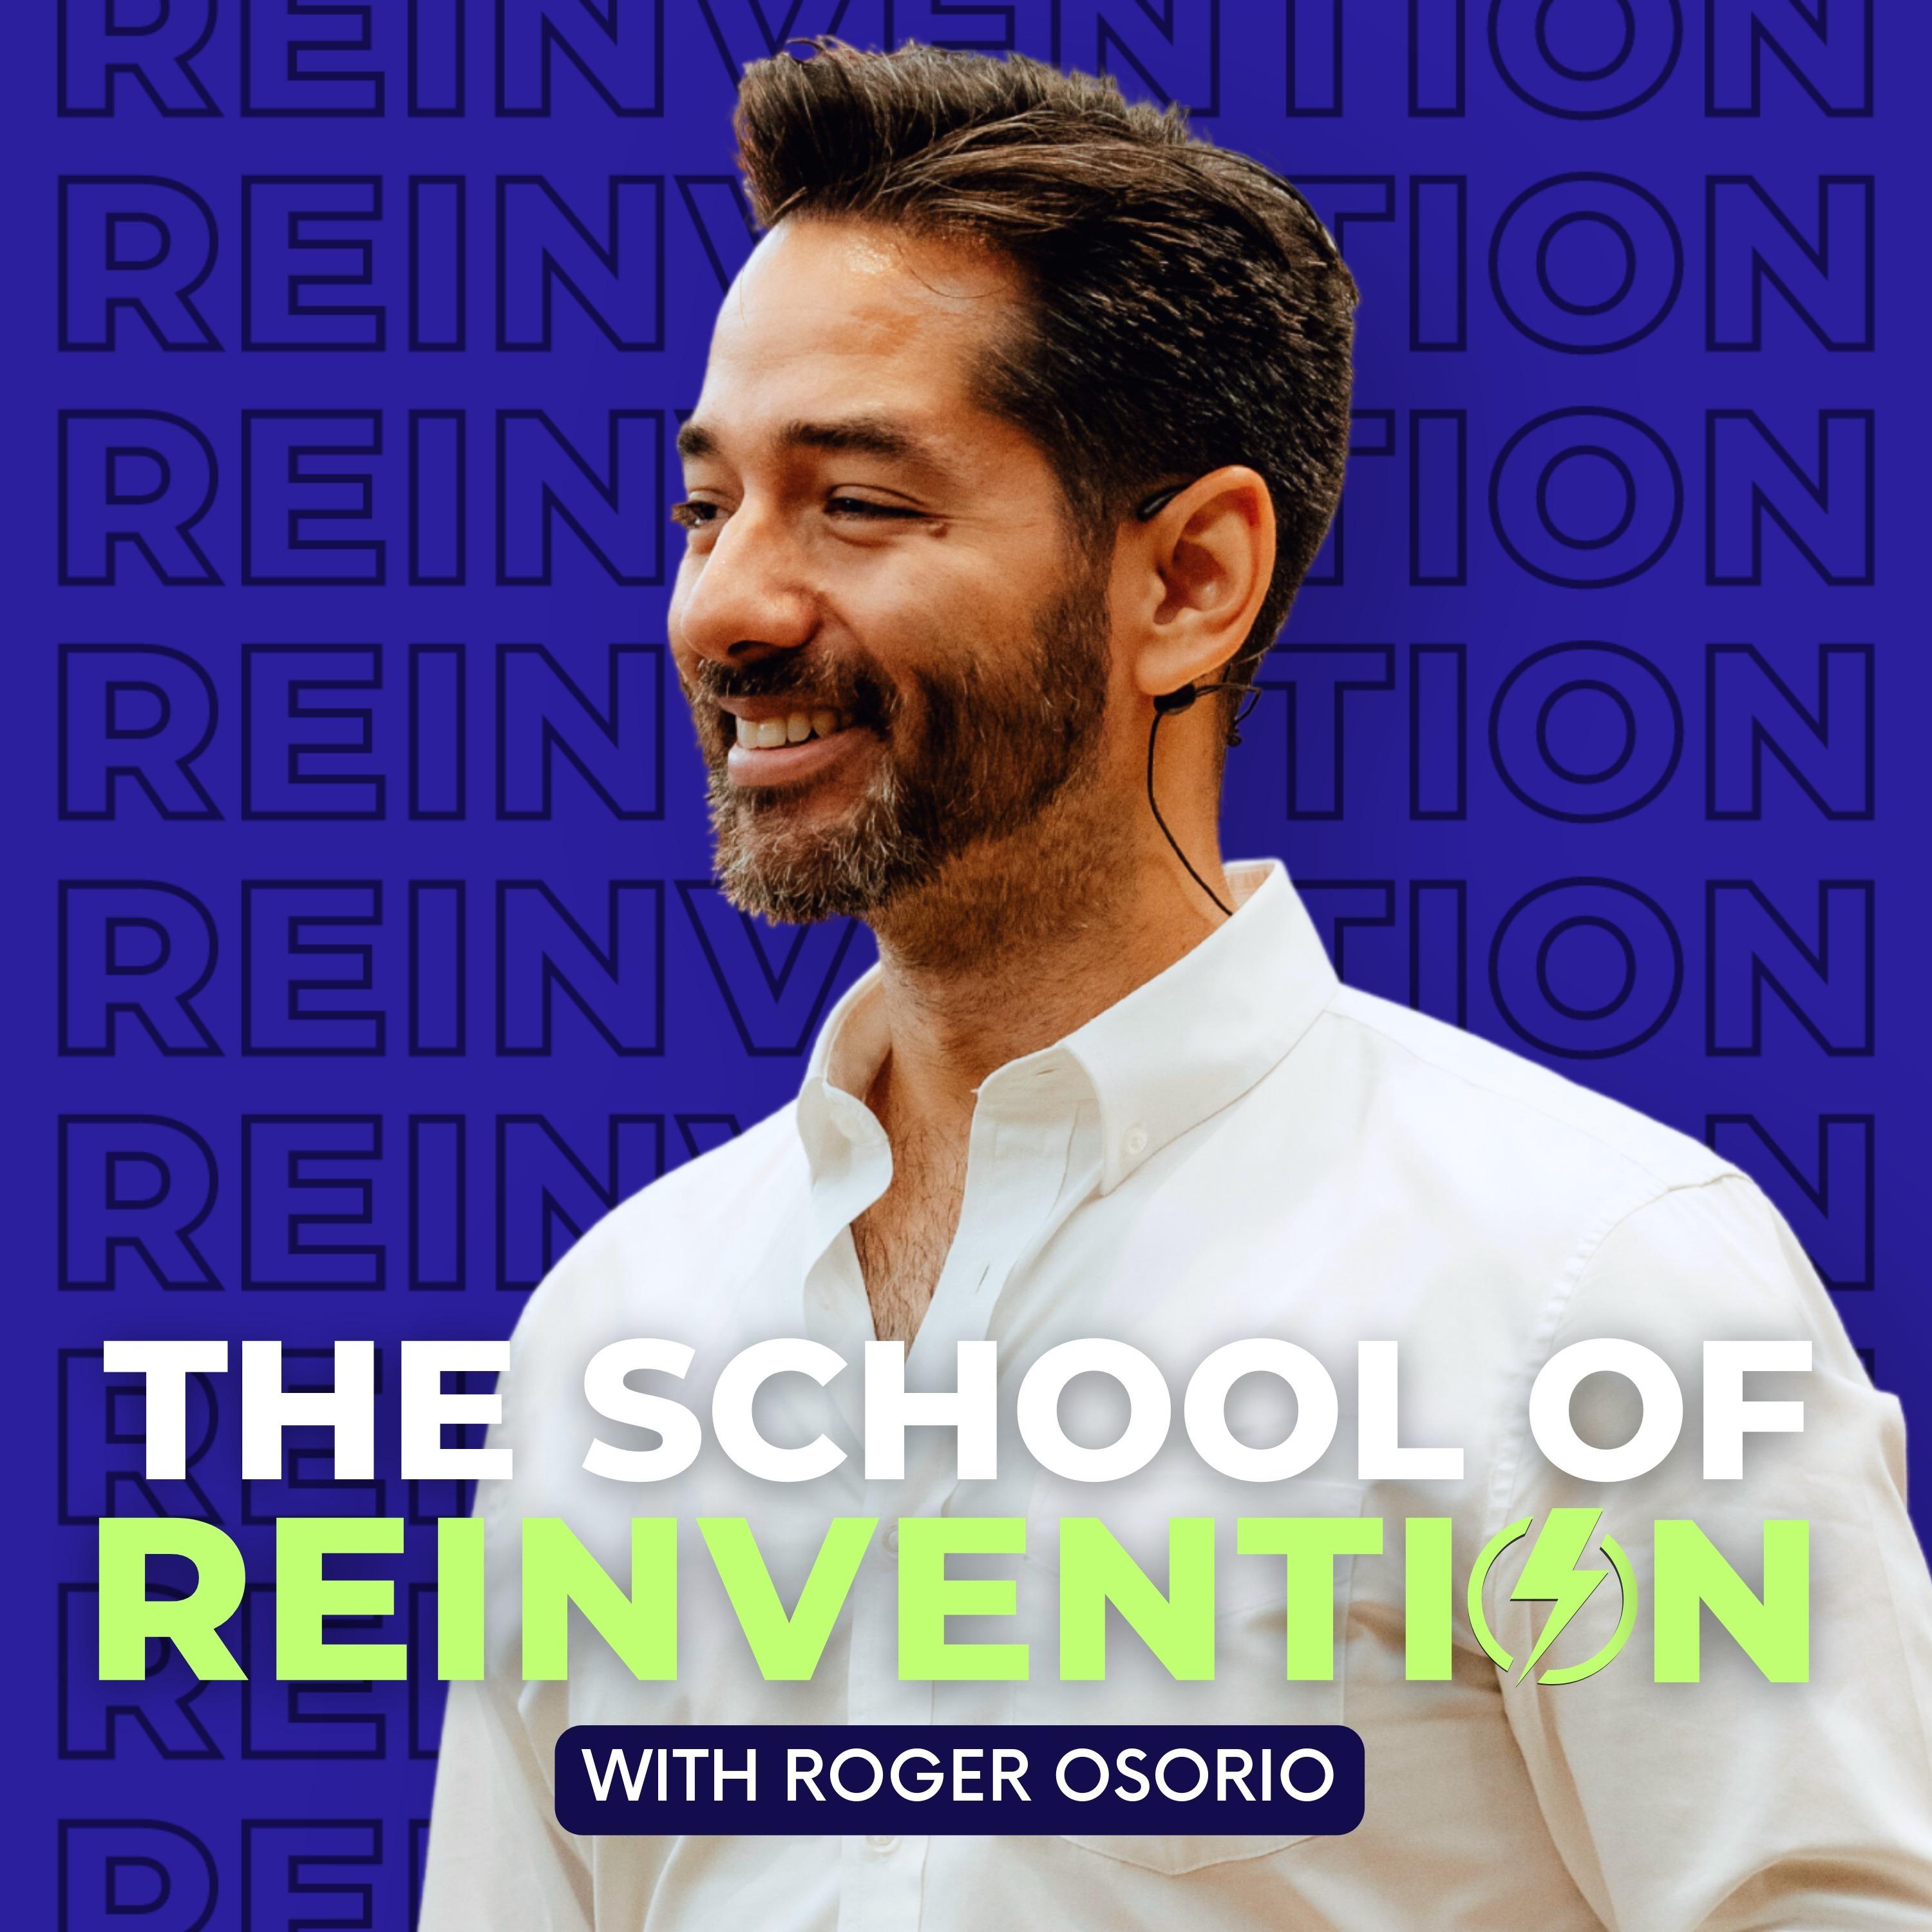 The School of Reinvention